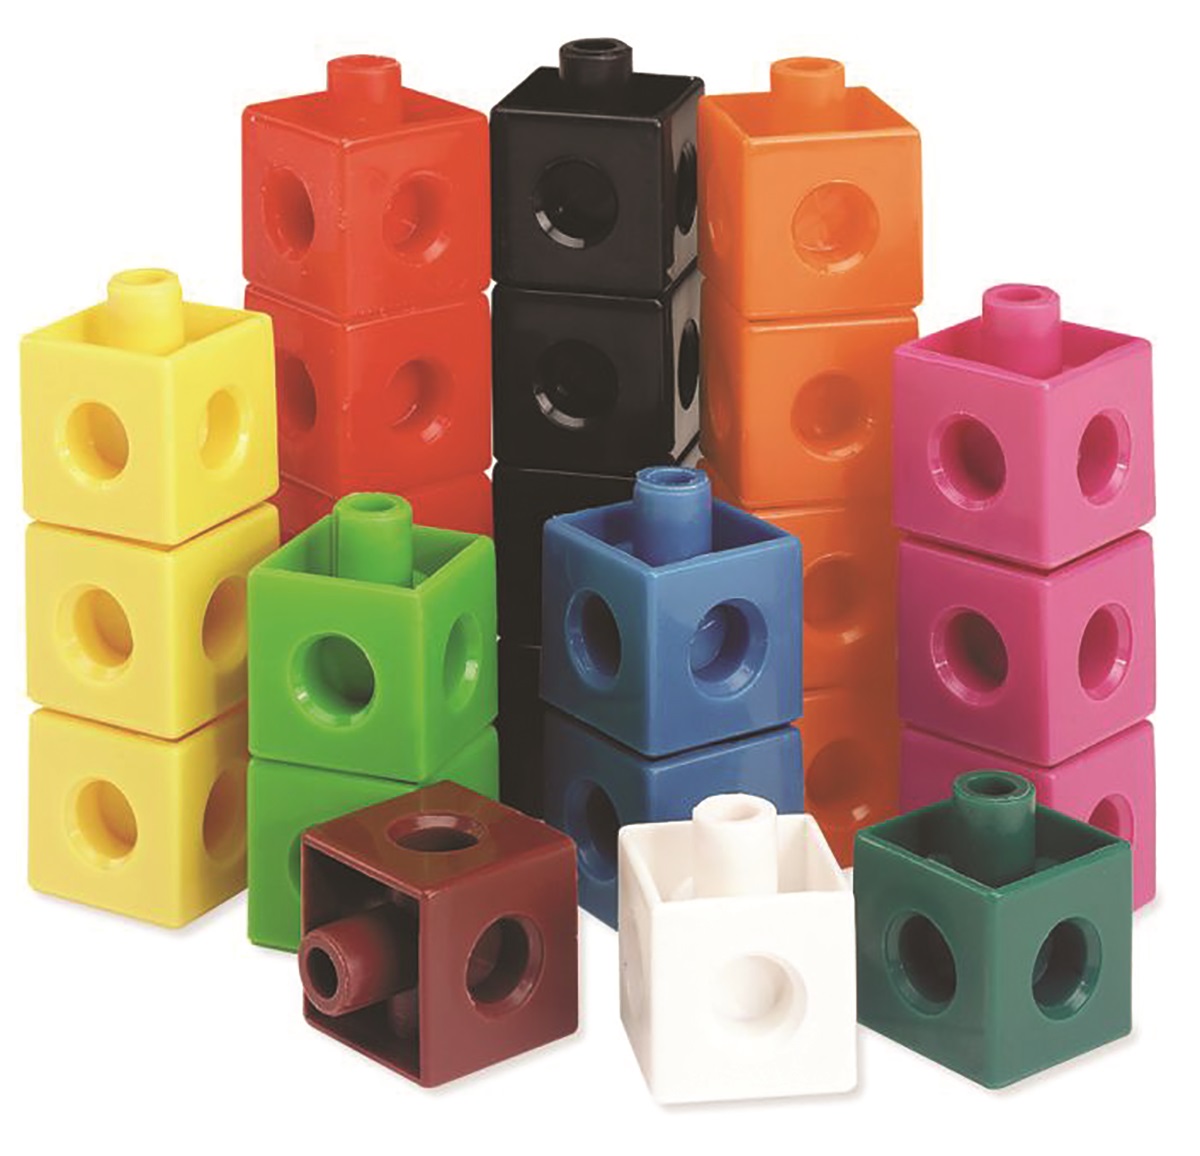 Cuisenaire Snap Cubes/Blocks for Learning Math in Different Colors 